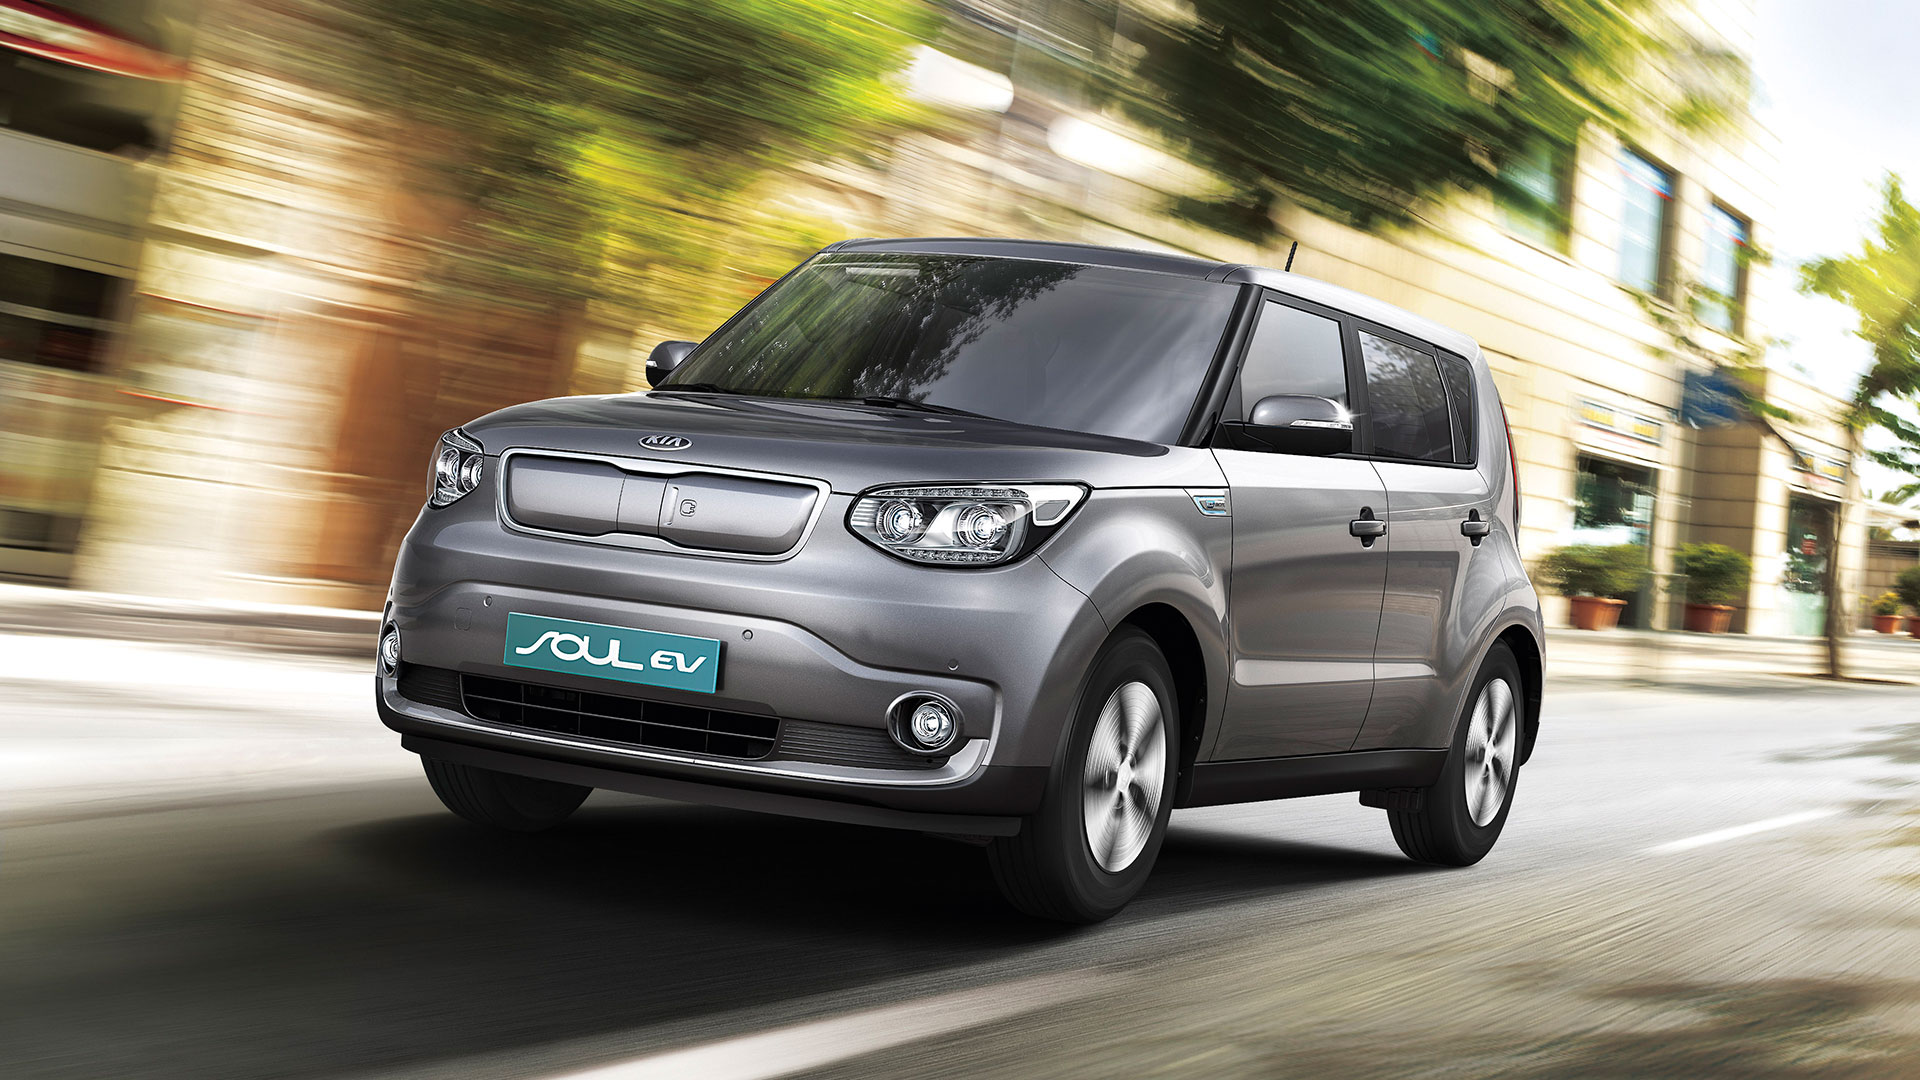 Silver Kia Soul Ev Electric Vehicle In Motion Wallpaper And